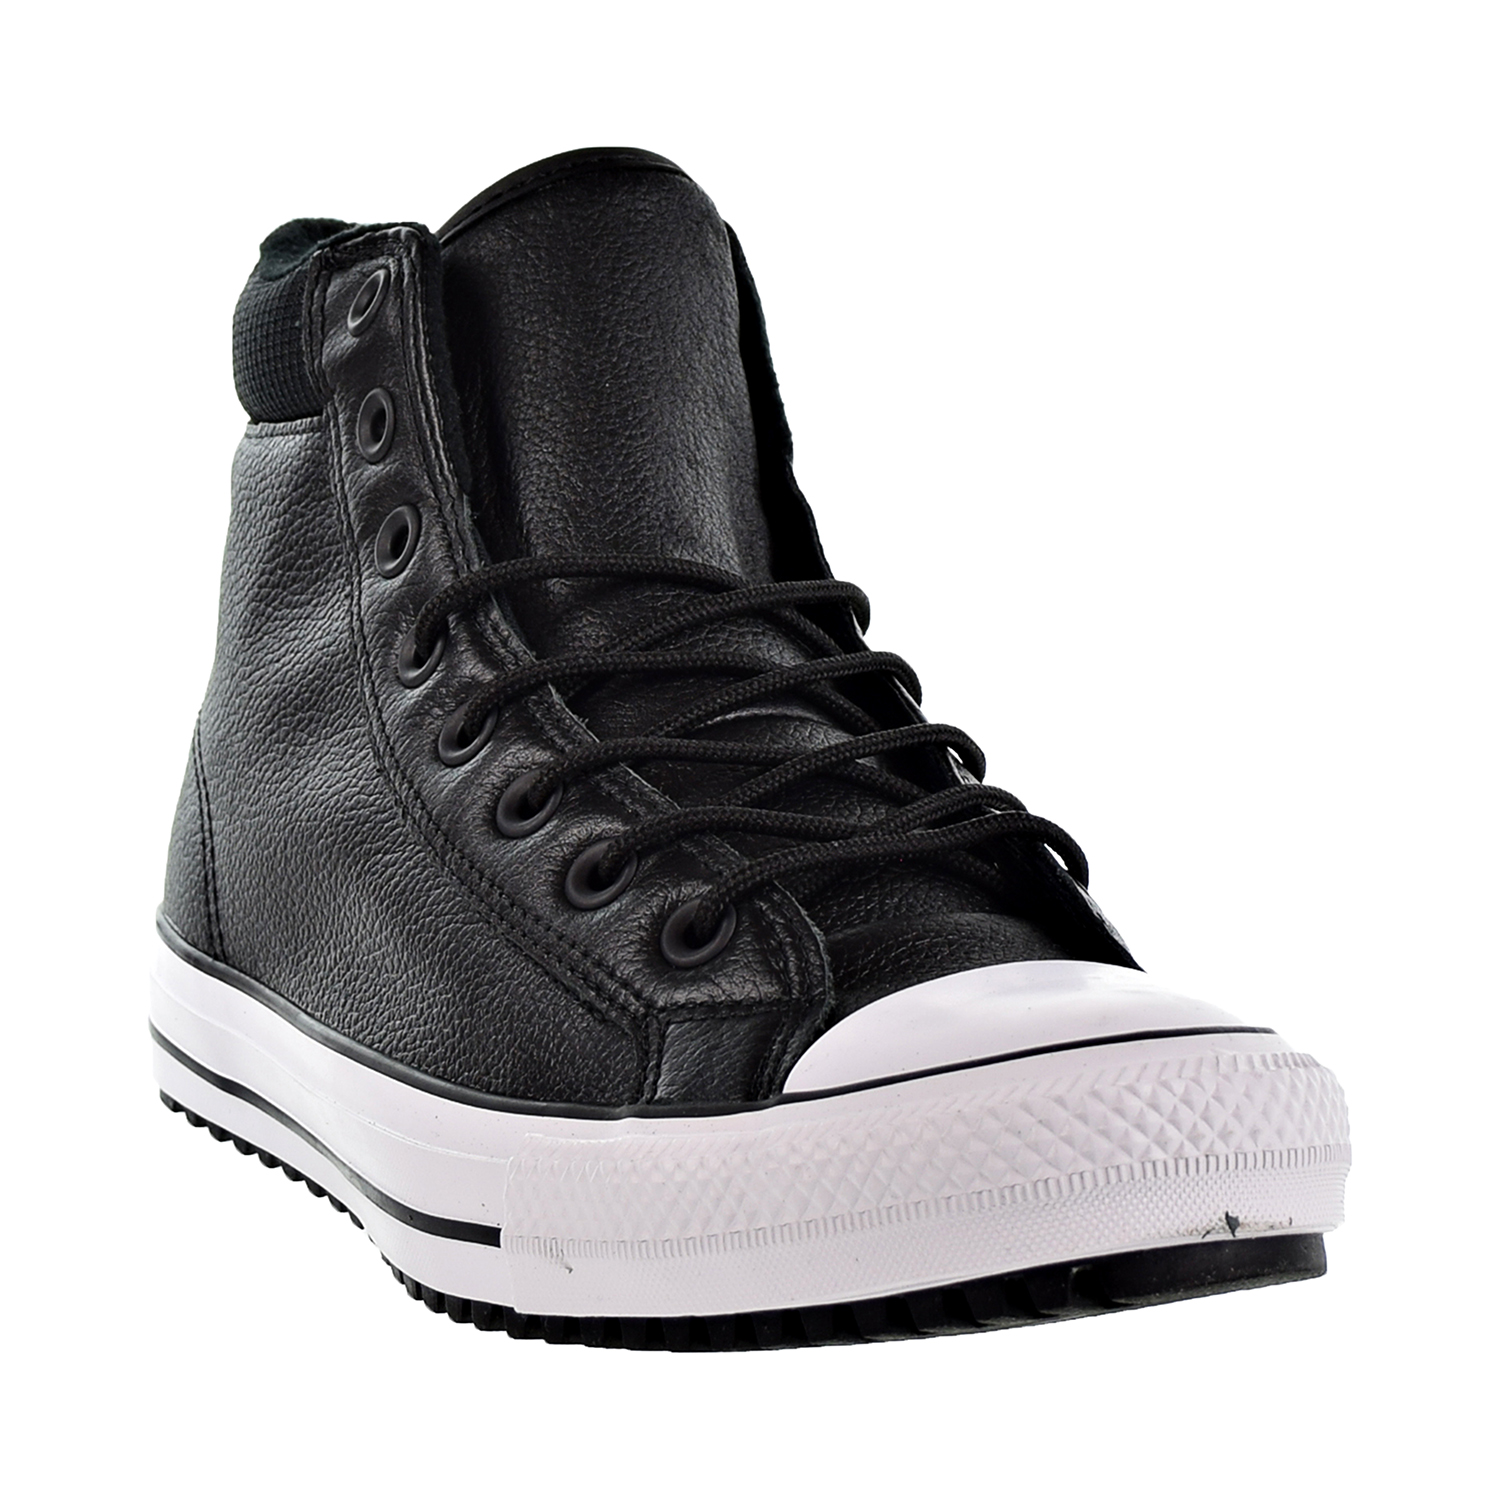 converse chuck taylor pc leather high top boot unisex boot